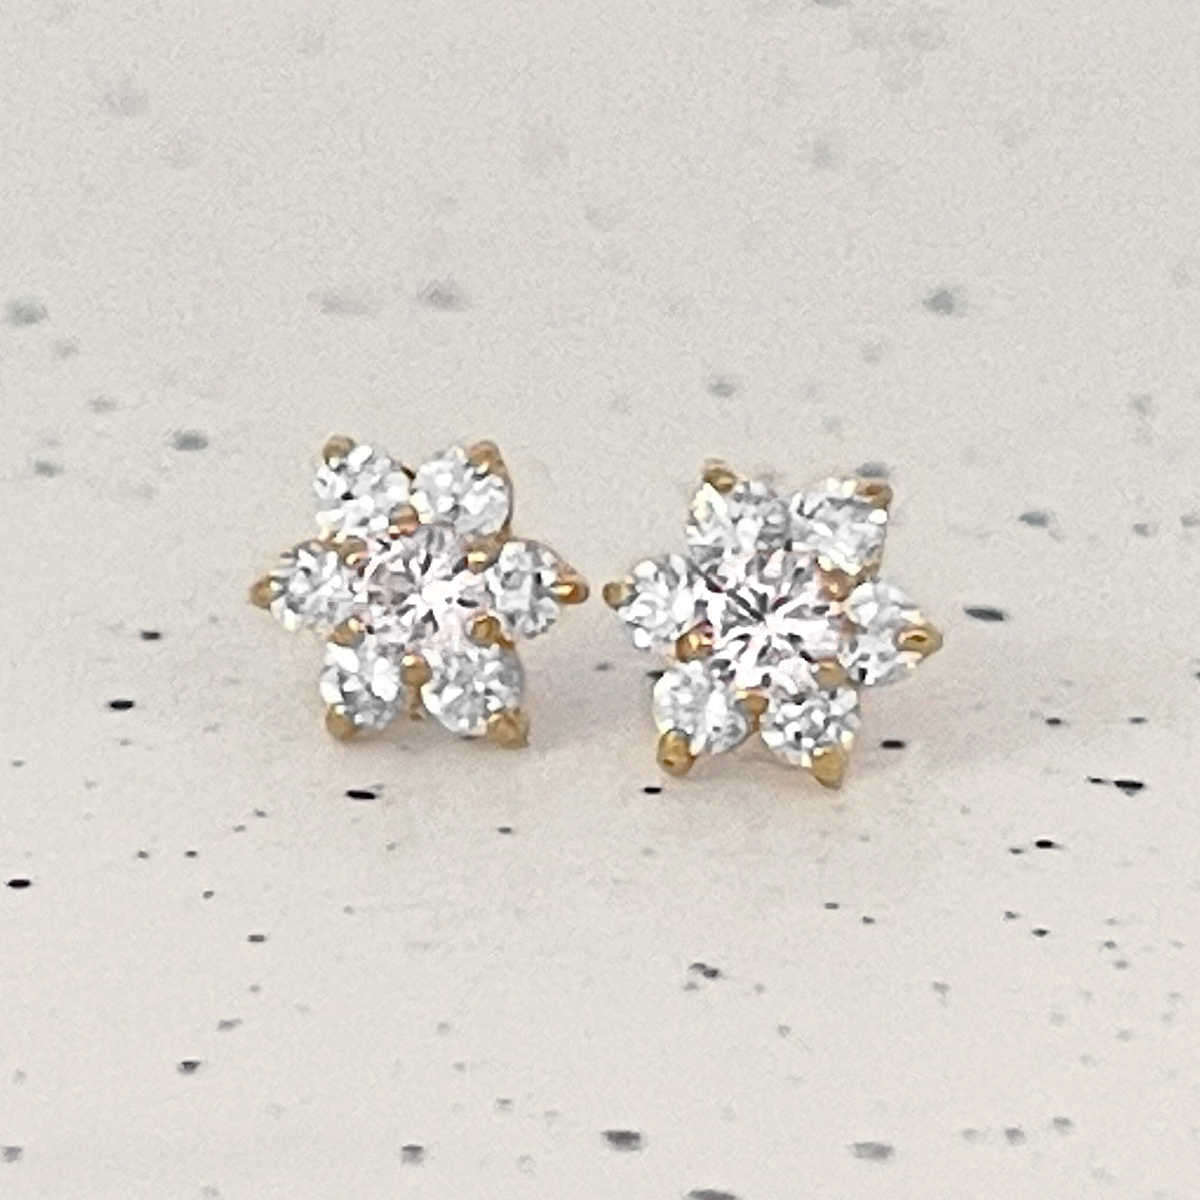 Gemstone Flower Earrings | 14k Solid Gold Screw Back Stud from Two of Most